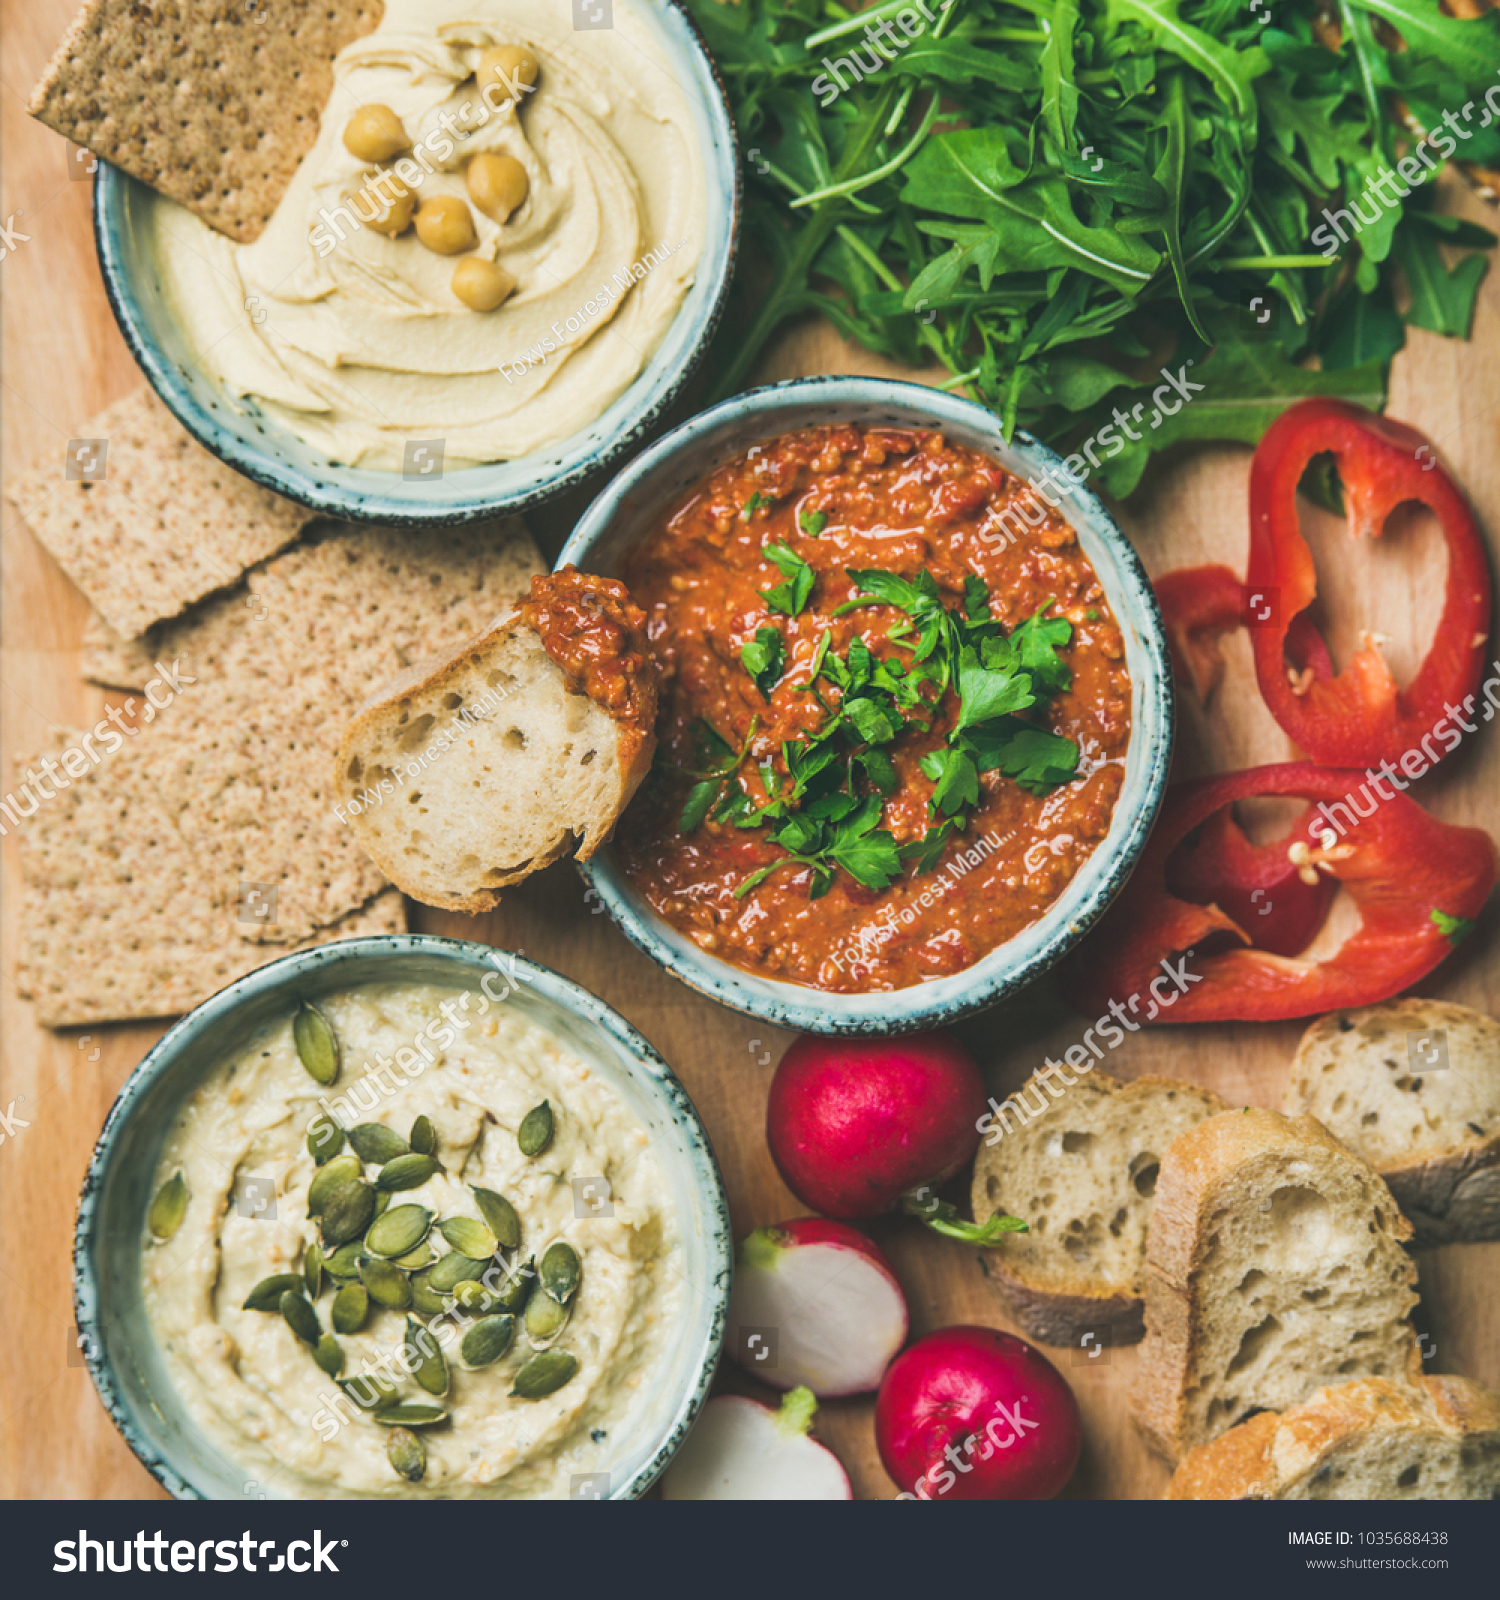 Vegan snack board. Flat-lay of various Vegetarian dips hummus, babaganush and muhammara with crackers, bread and fresh vegetables, top view, square crop. Clean eating, healthy, dieting food concept #1035688438